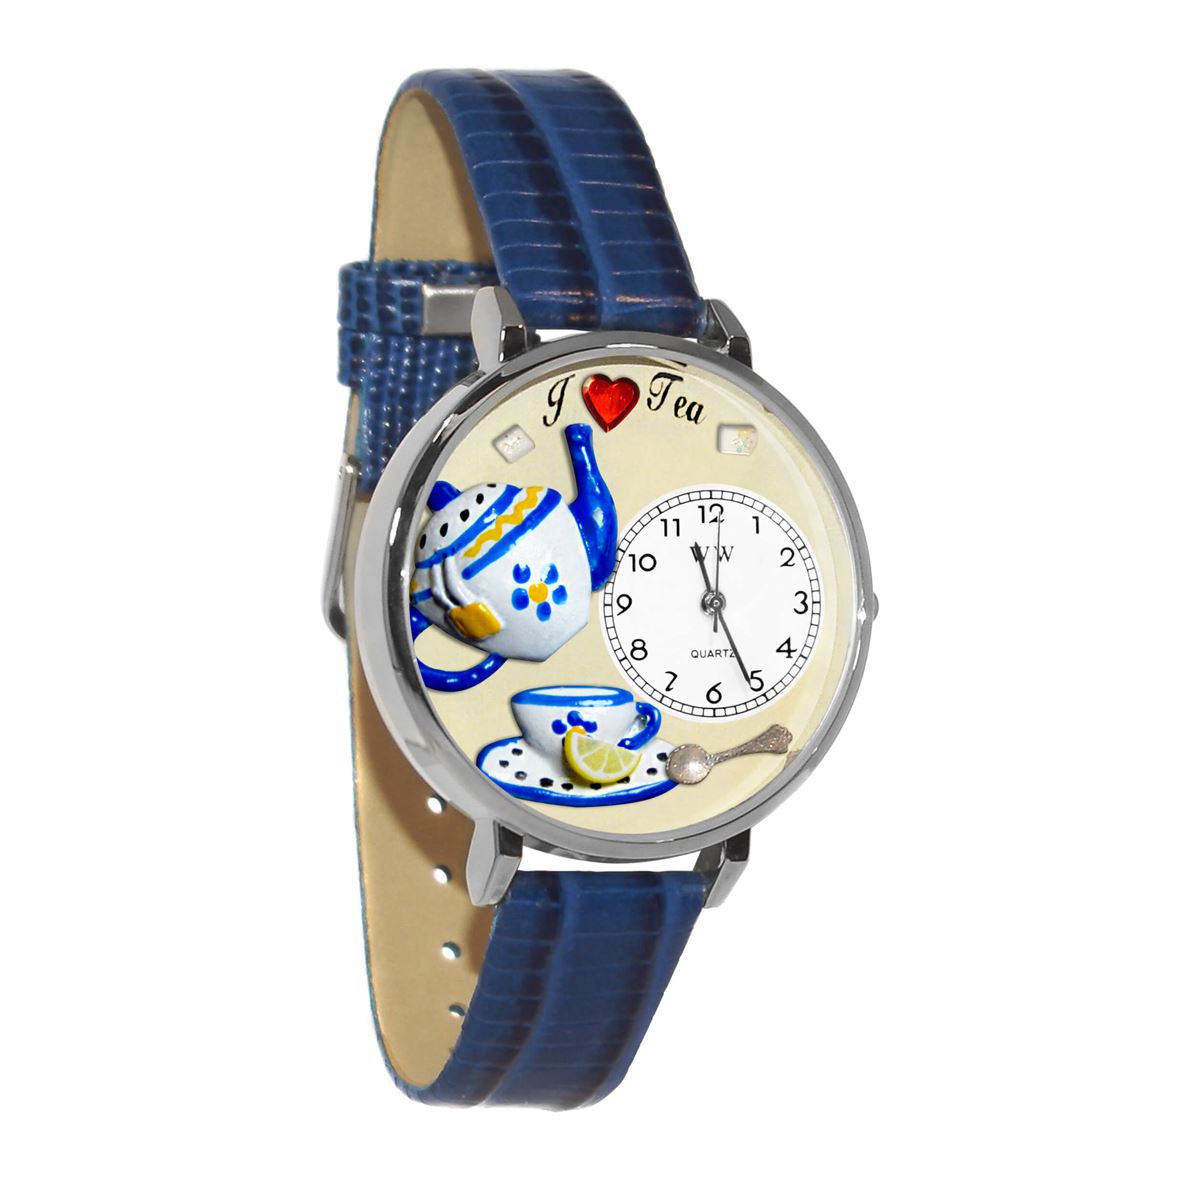 Whimsical Gifts | Tea Lover 3D Watch Large Style | Handmade in USA | Hobbies & Special Interests | Food & Wine | Novelty Unique Fun Miniatures Gift | Silver Finish Royal Blue Leather Watch Band